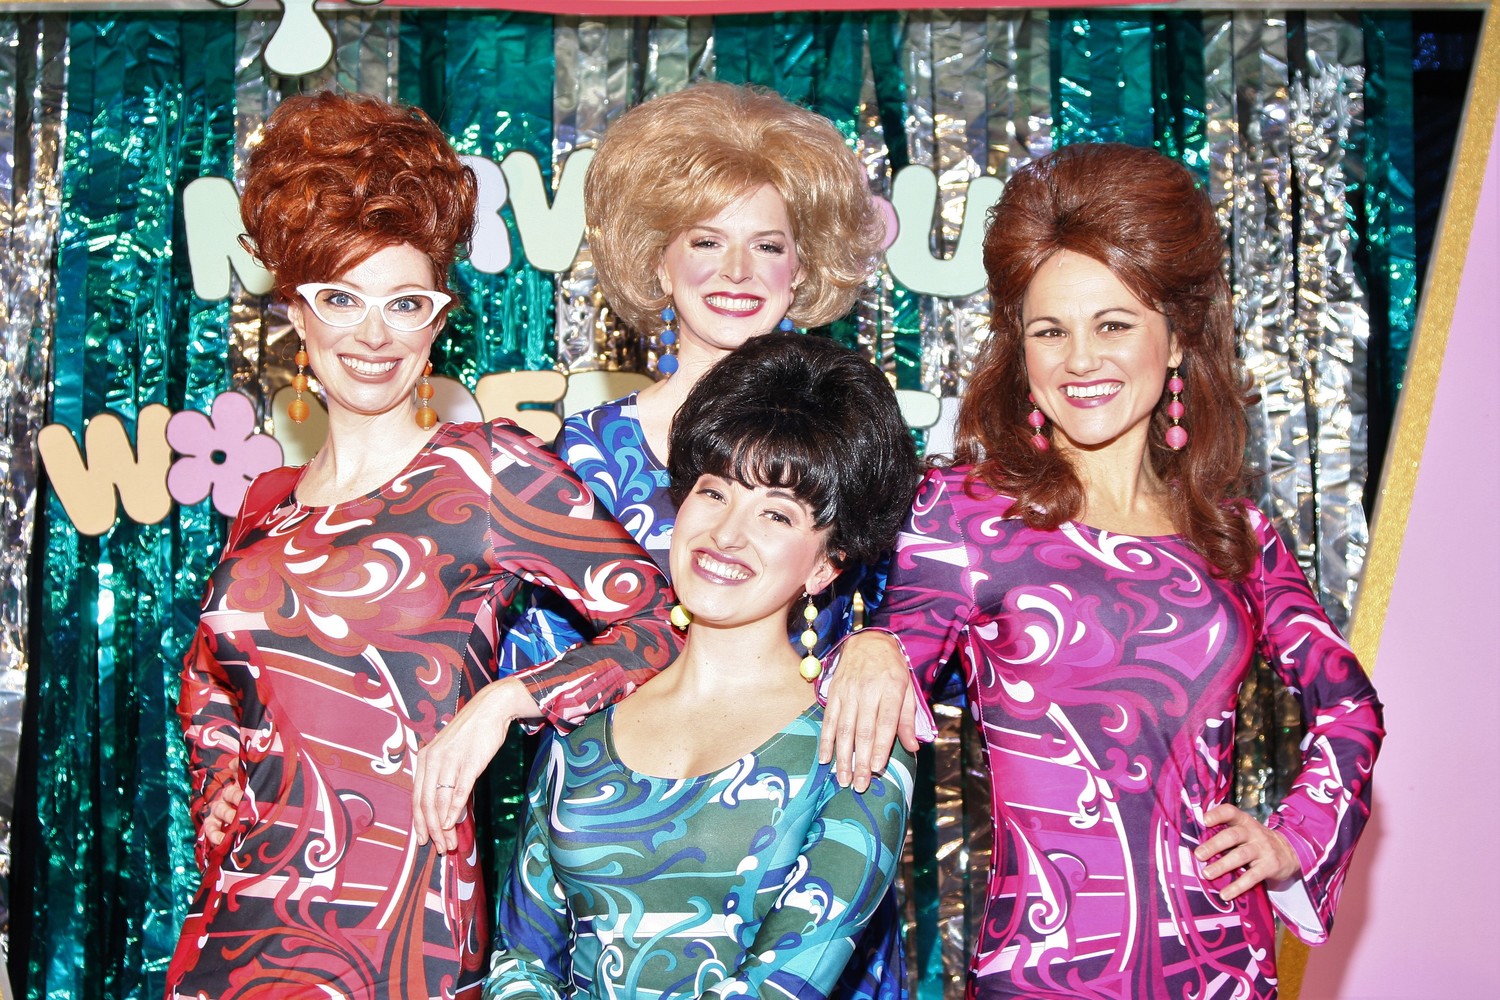 The Alhambra production of “The Marvelous Wonderettes” stars (from top left) Erica Lustig as Missy Miller, Lindsay Nantz as Suzy Simpson, Juliana Davis as Cindy Lou Huffington and Kayla Thomas (bottom) as Betty Jean Reynolds.